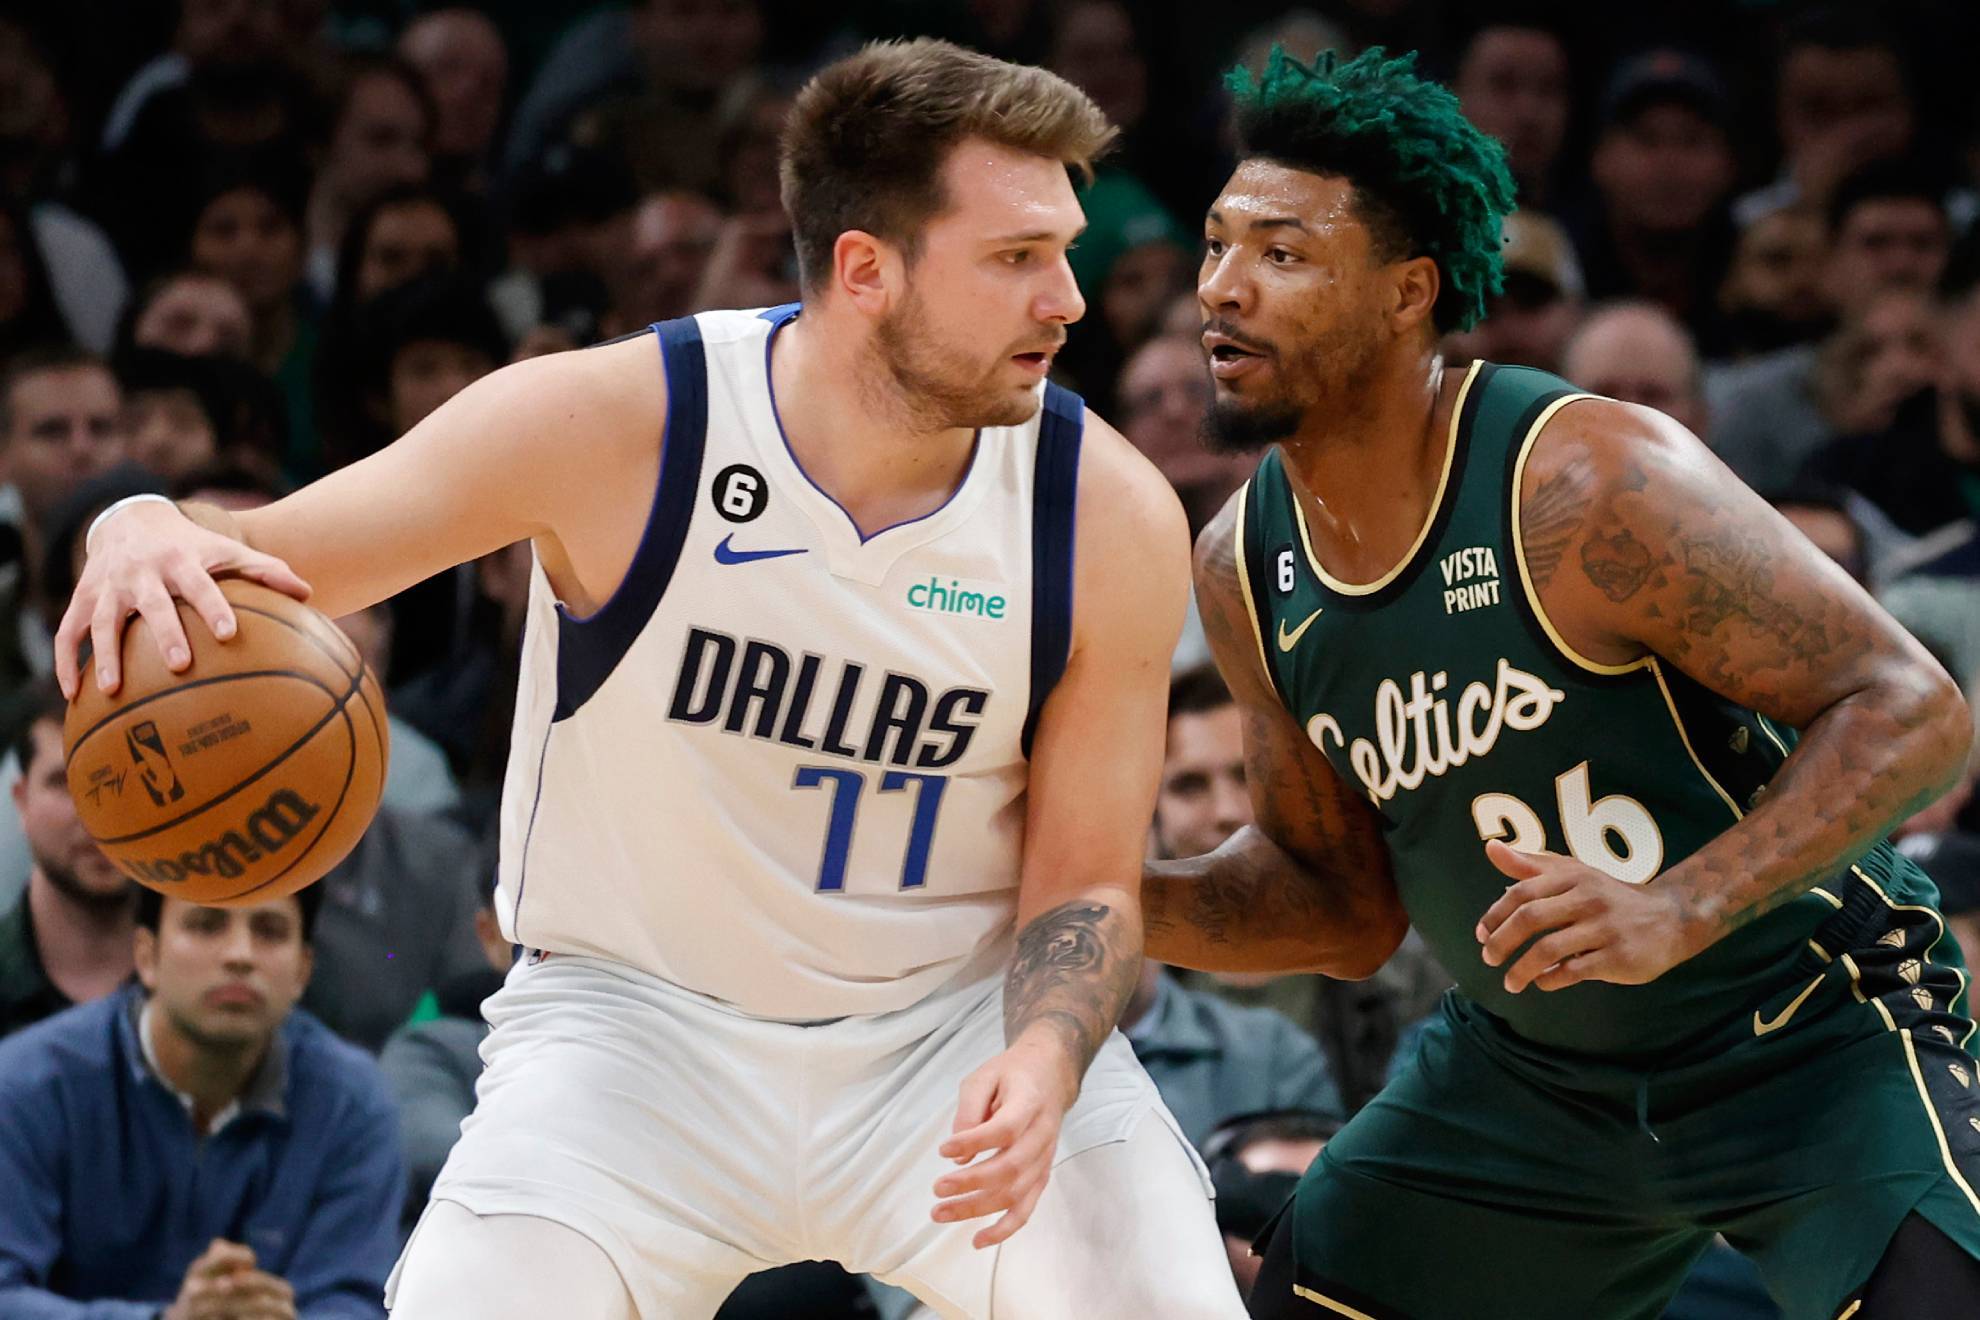 Luka Doncic, Marcus Smart